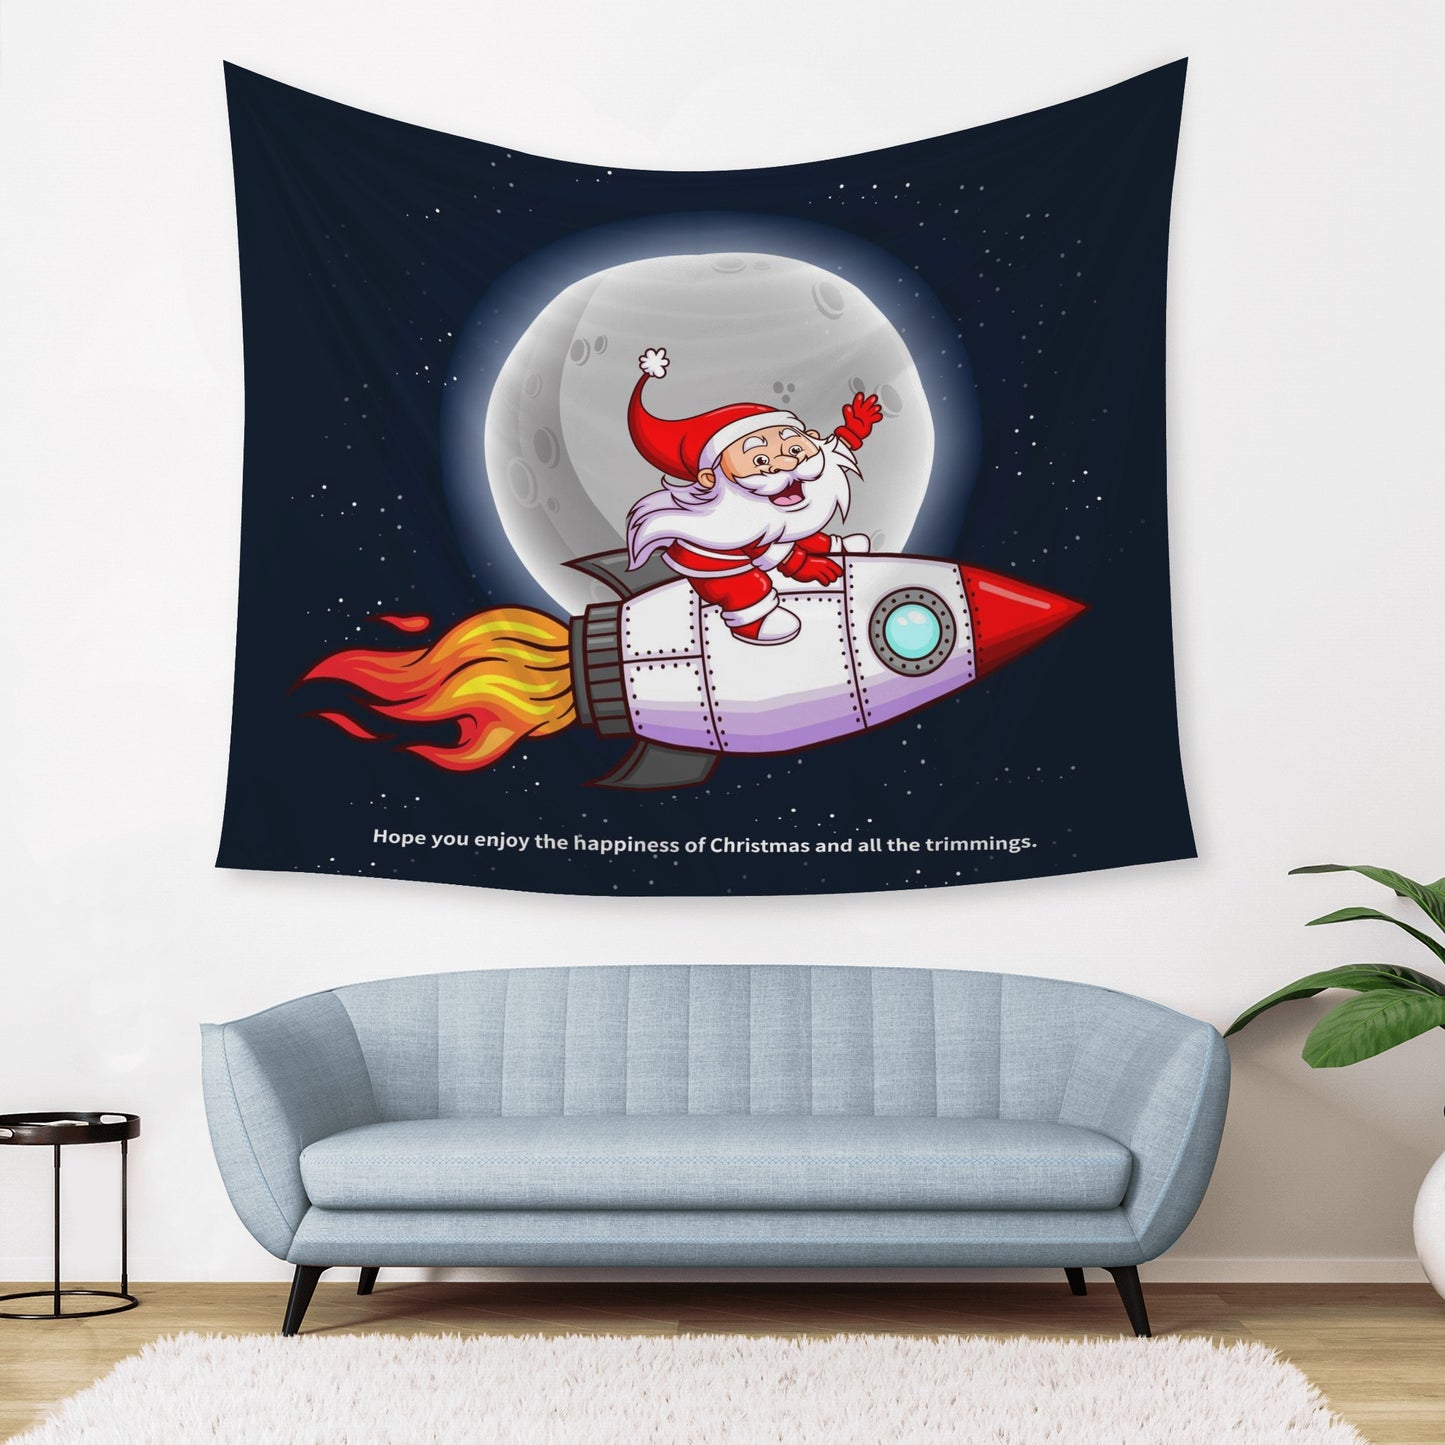 Rocket Christmas Wall Tapestry To Bring Beauty To Any Space